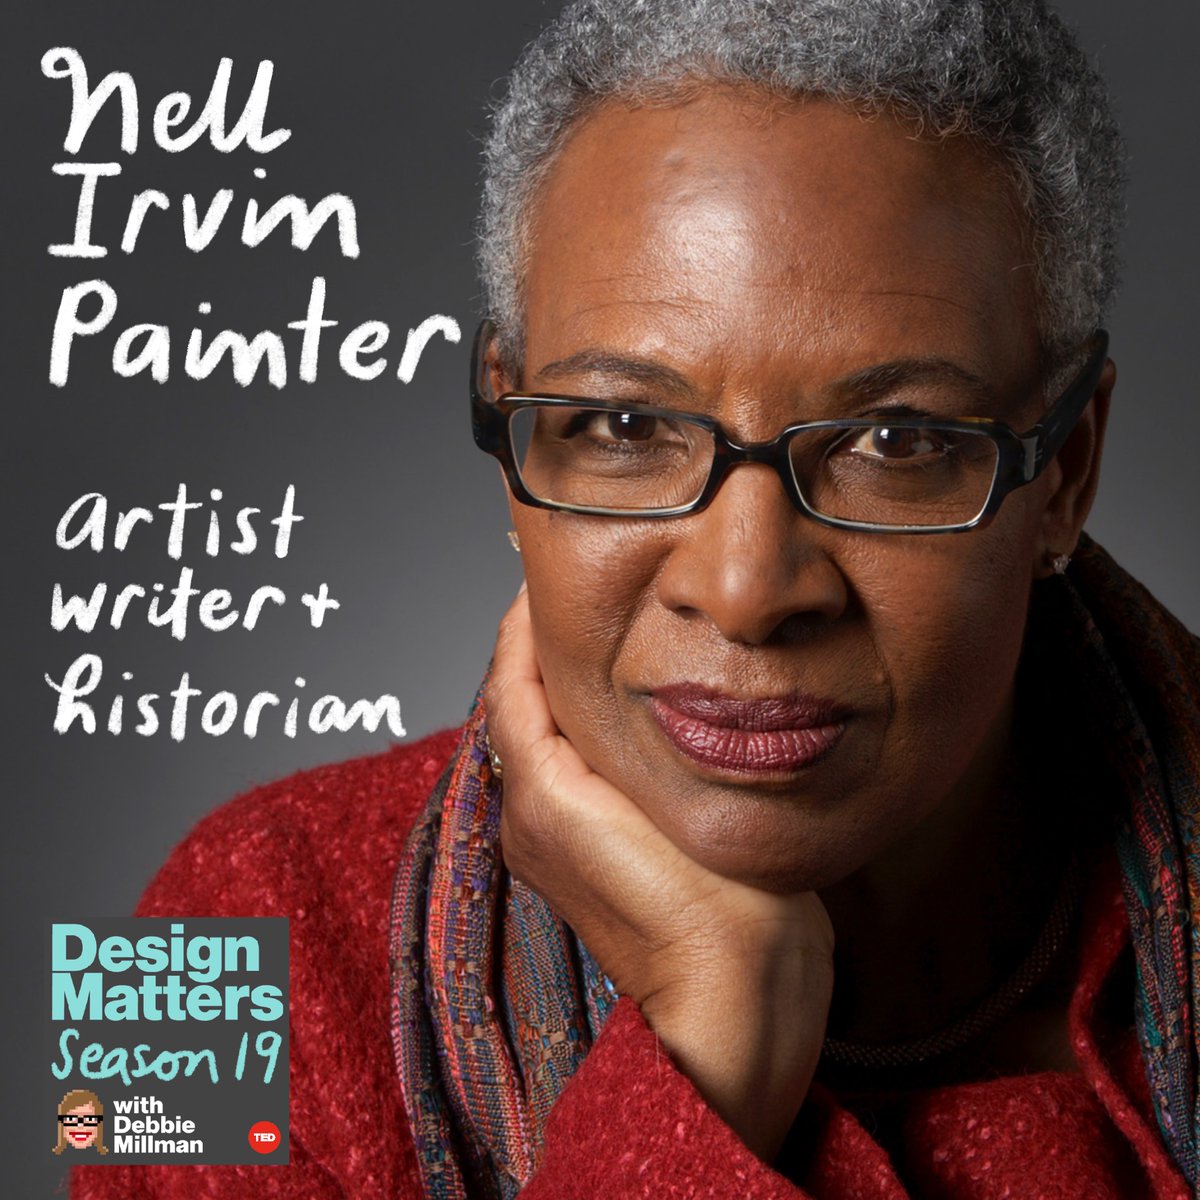 “I have few book prizes. When I was the age of young and up-and-coming historians, book prizes were not being given to black women. By the time black women are getting prizes, they are going to younger artists and writers.” —Nell Irvin Painter apple.co/3vVXUdx